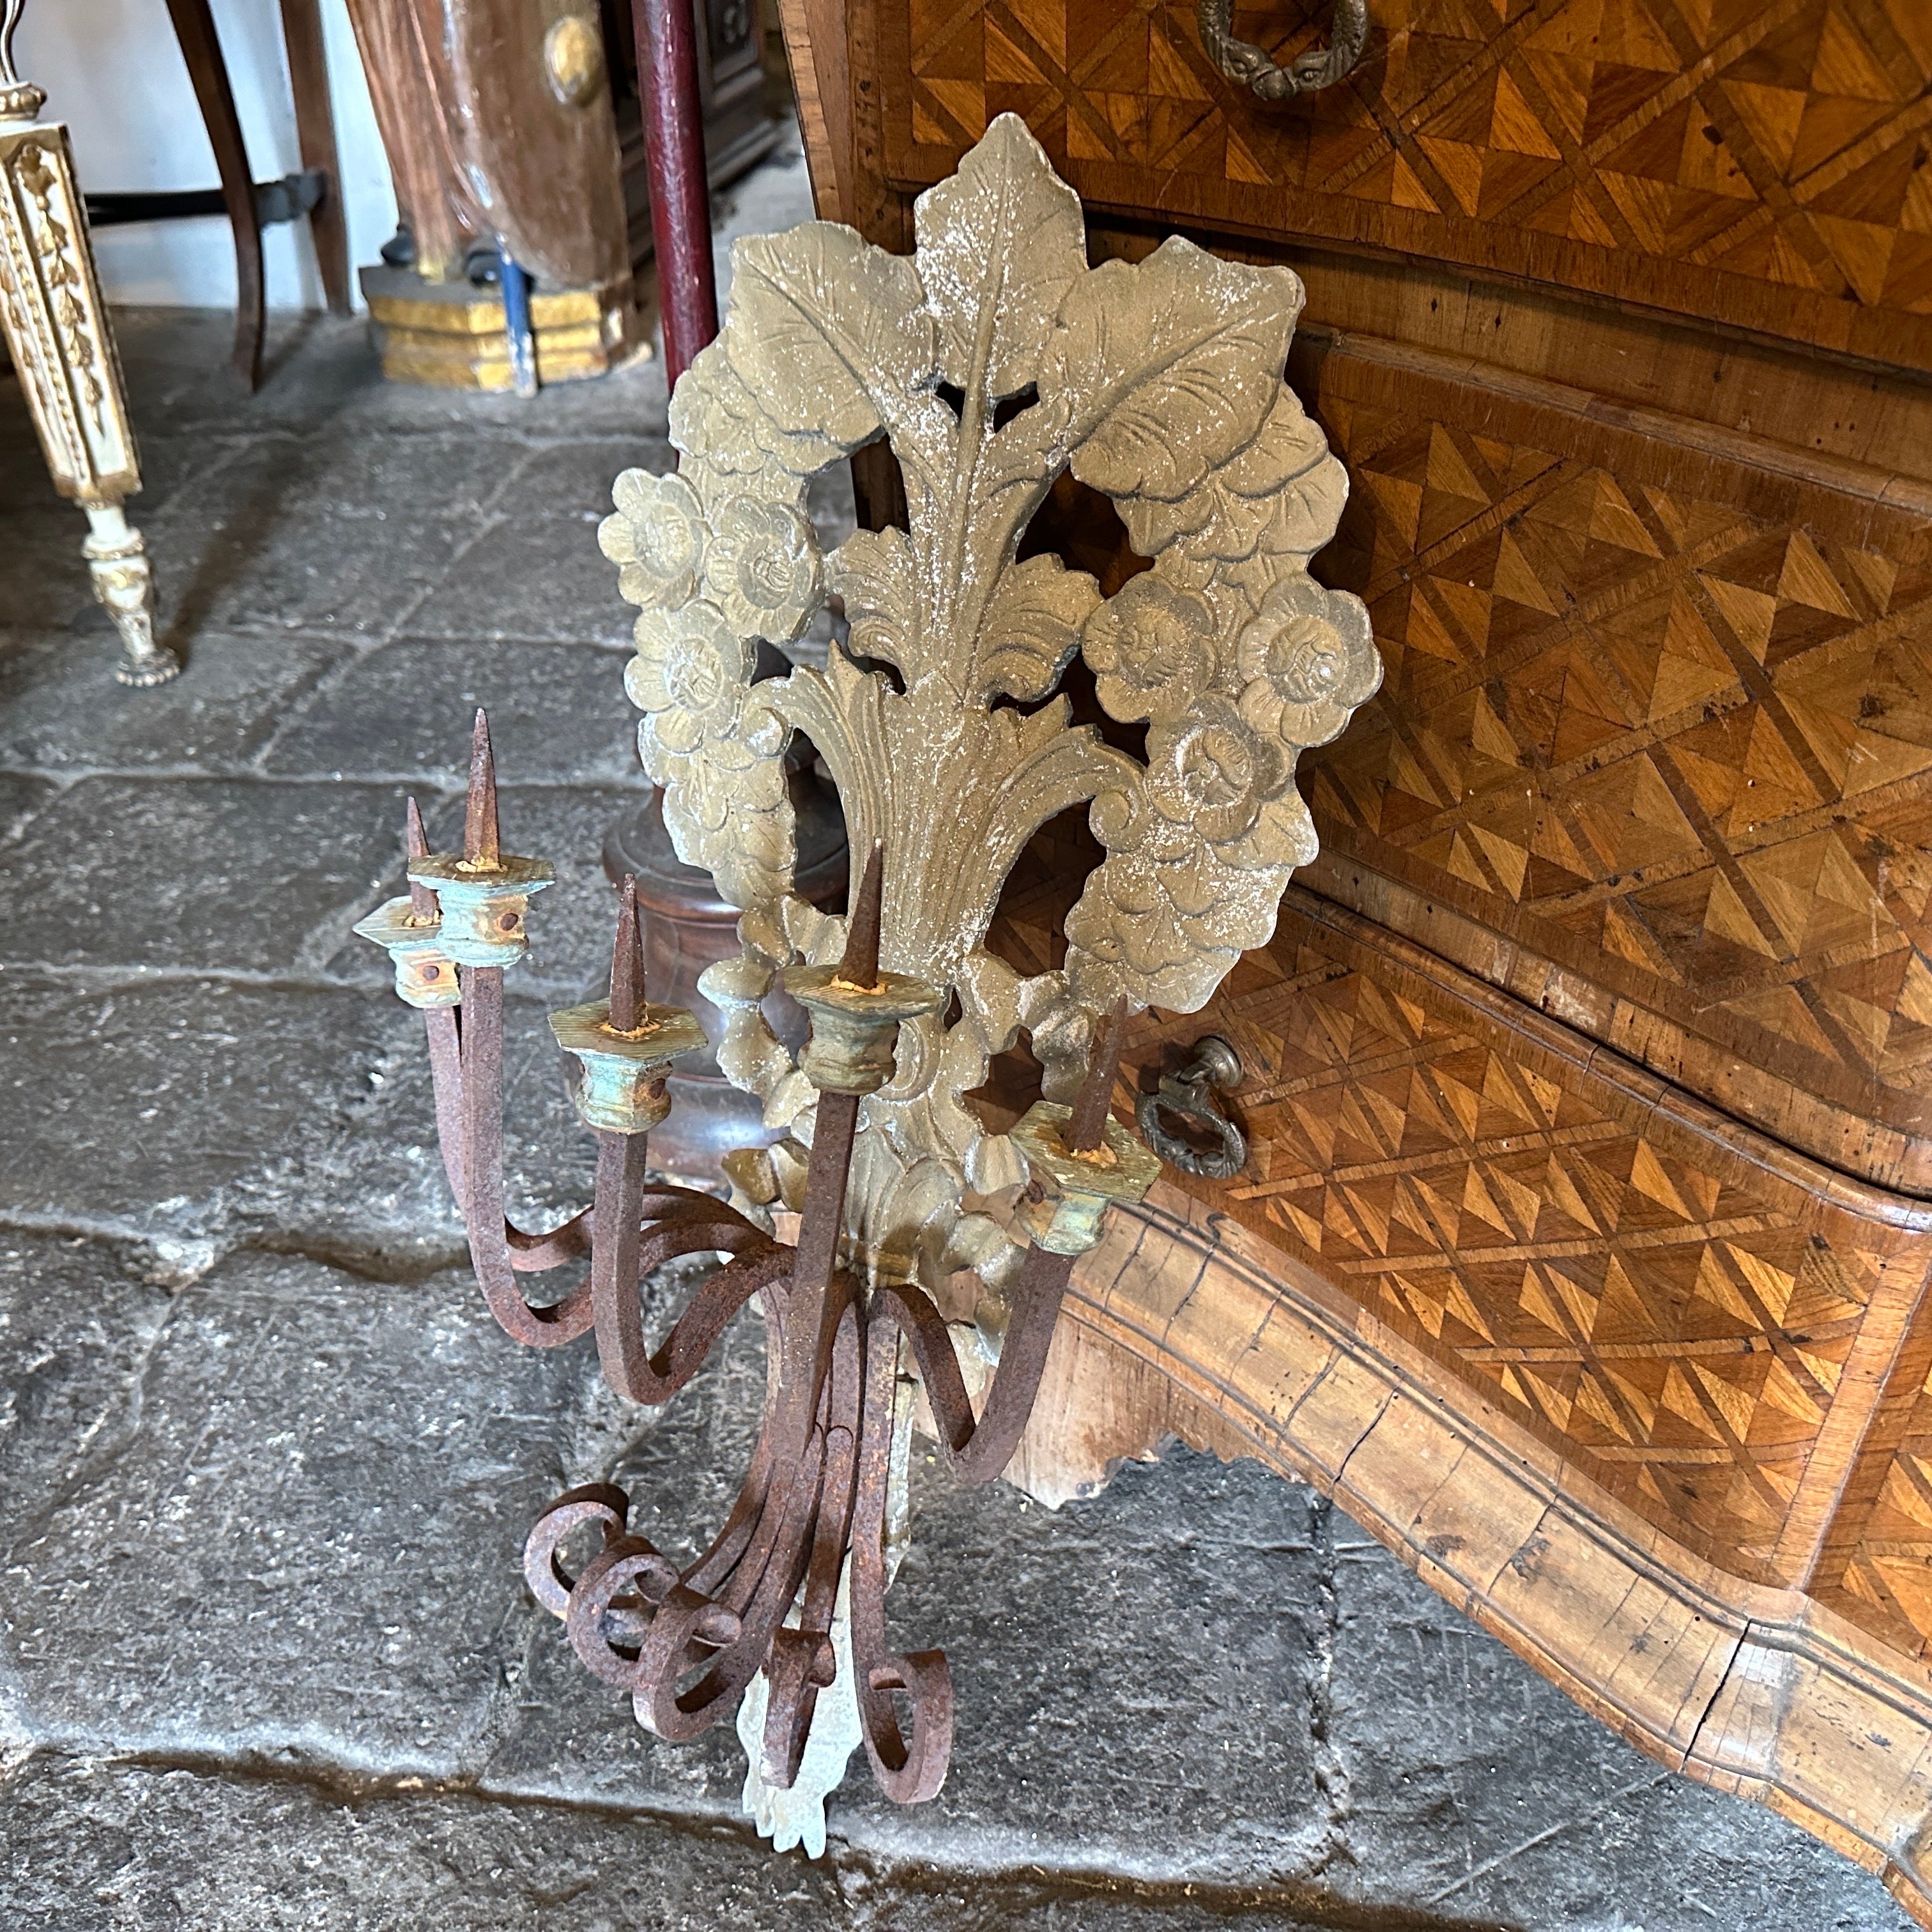 This iron and wood candle wall sconce is a striking piece, showcasing the distinctive characteristics of the Art Nouveau style blended with Italian craftsmanship. The sconce combines iron and wood, with the iron providing a sturdy frame and wood